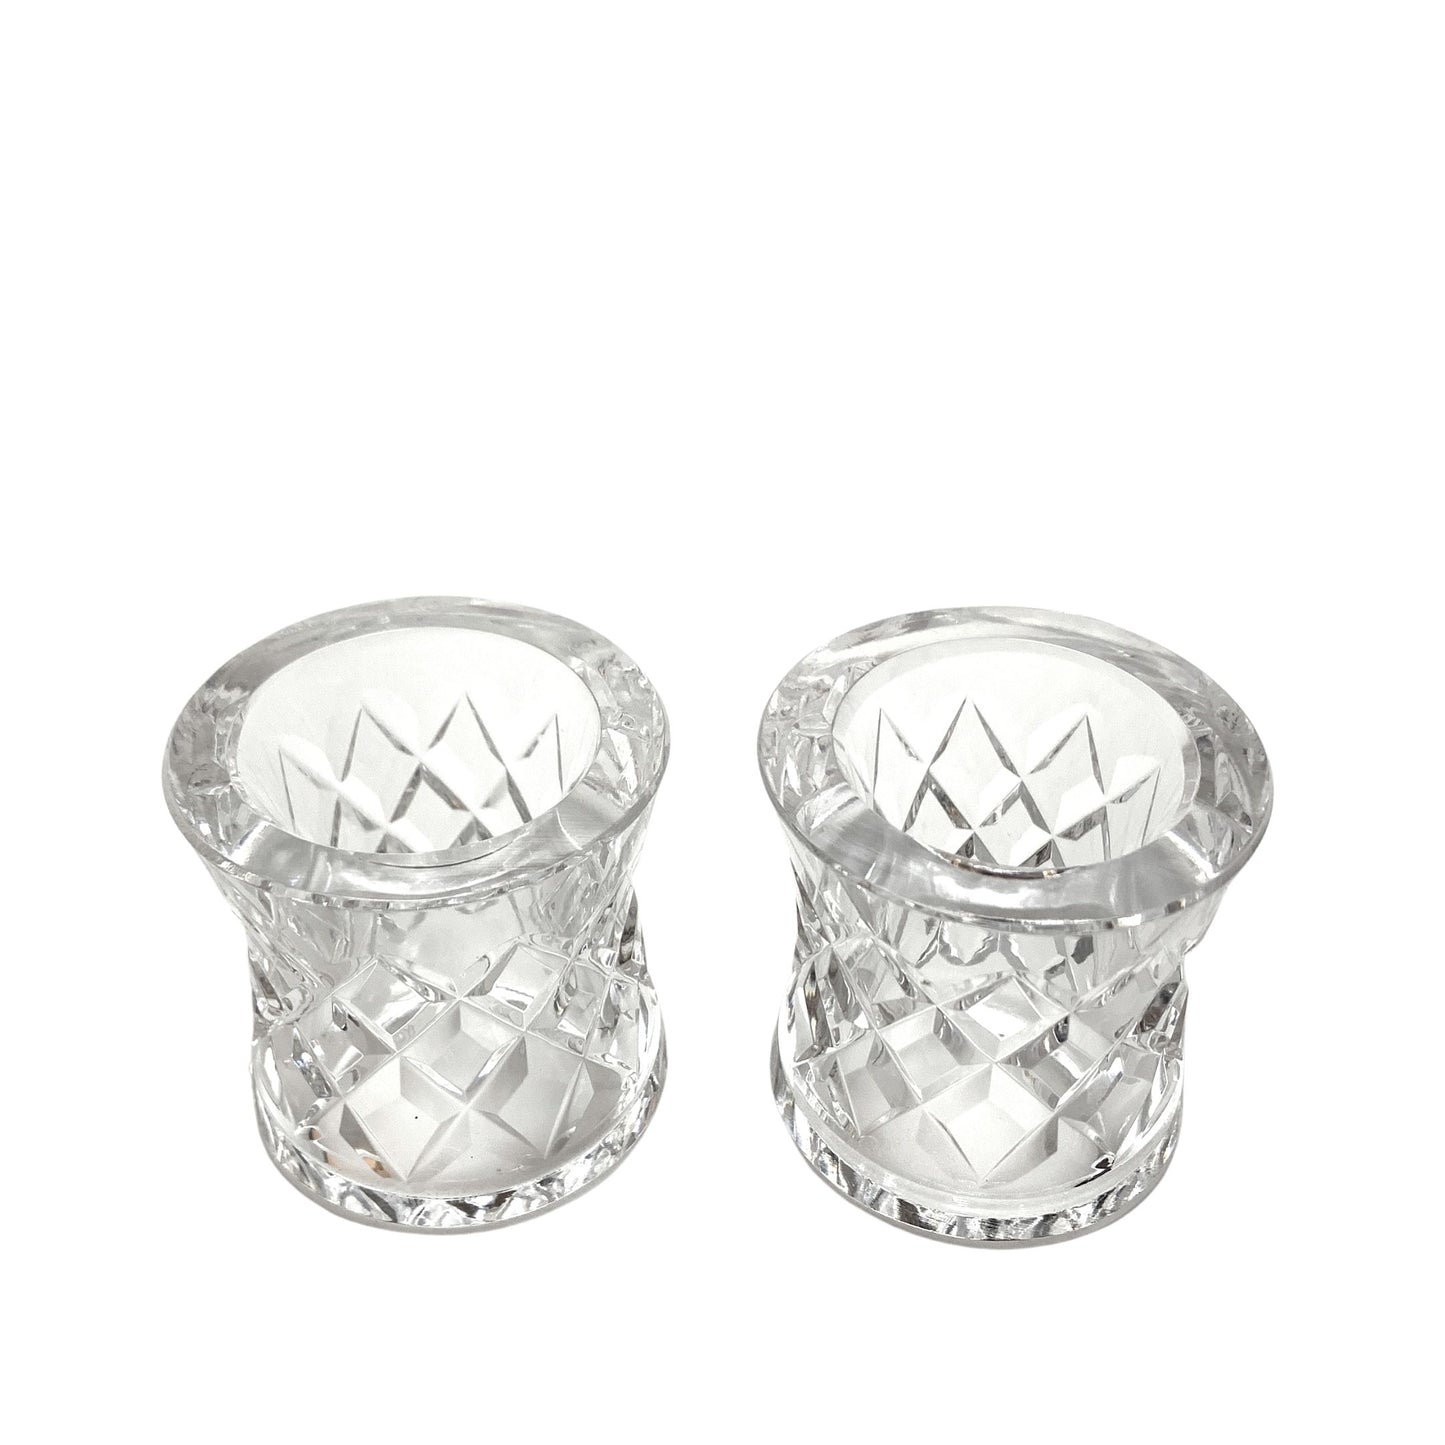 Waterford Comeragh Rare Thick Crystal Napkin Rings (2)